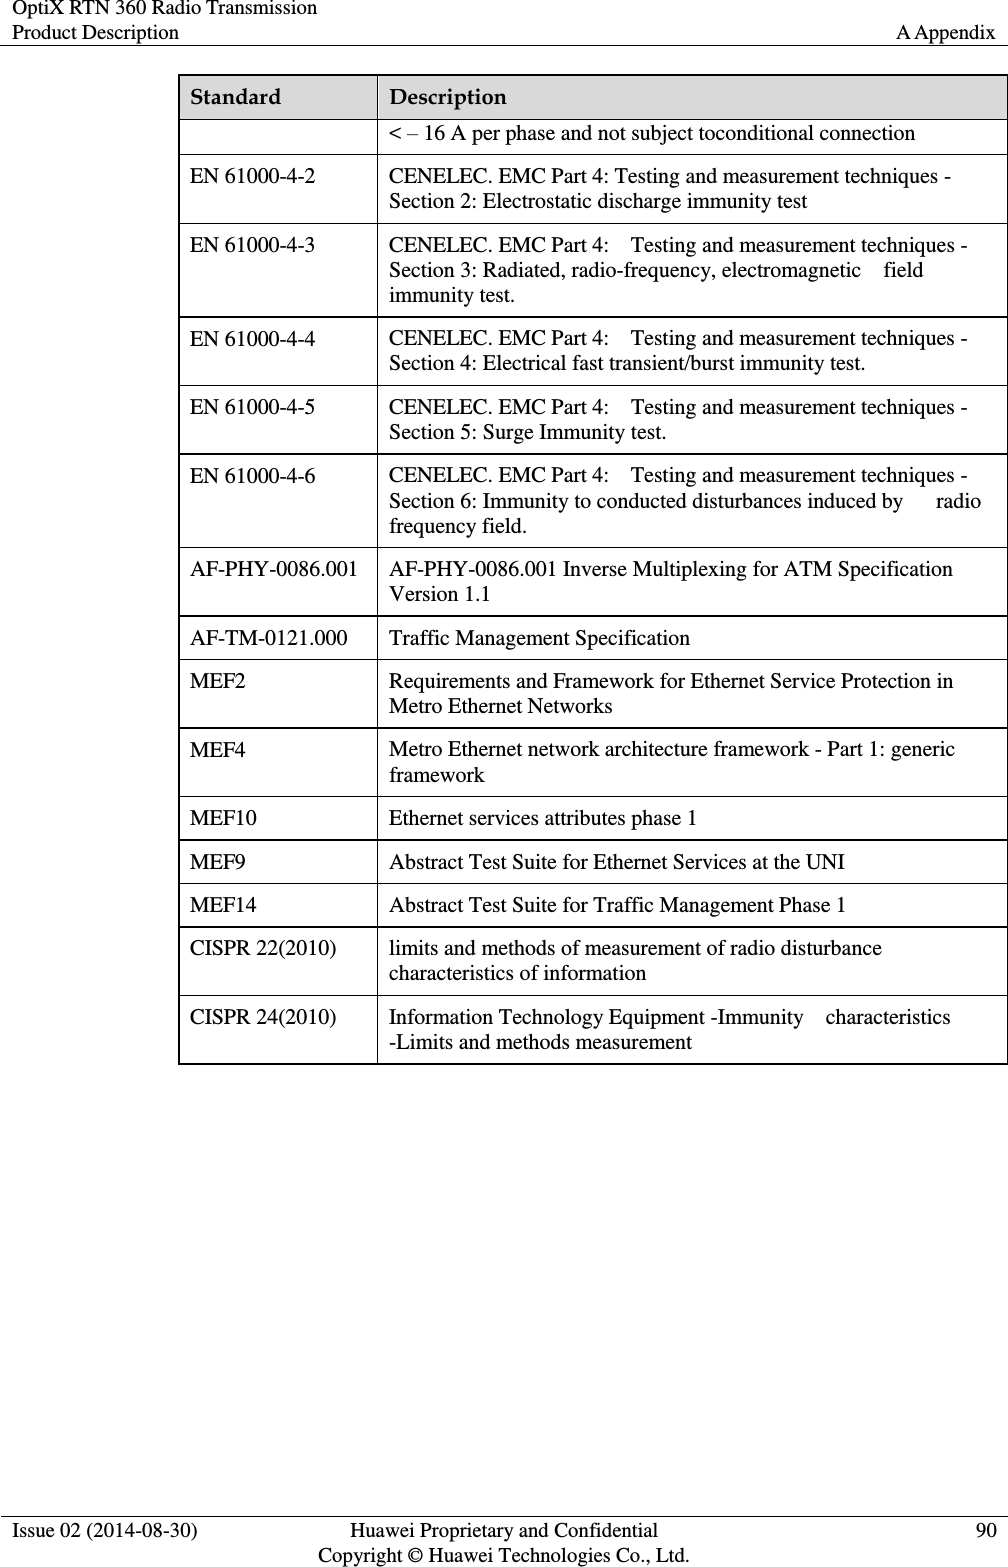 OptiX RTN 360 Radio Transmission Product Description A Appendix  Issue 02 (2014-08-30) Huawei Proprietary and Confidential                                     Copyright © Huawei Technologies Co., Ltd. 90  Standard Description &lt; – 16 A per phase and not subject toconditional connection EN 61000-4-2 CENELEC. EMC Part 4: Testing and measurement techniques -  Section 2: Electrostatic discharge immunity test     EN 61000-4-3 CENELEC. EMC Part 4:    Testing and measurement techniques -   Section 3: Radiated, radio-frequency, electromagnetic    field immunity test.   EN 61000-4-4 CENELEC. EMC Part 4:    Testing and measurement techniques -  Section 4: Electrical fast transient/burst immunity test.   EN 61000-4-5 CENELEC. EMC Part 4:    Testing and measurement techniques -   Section 5: Surge Immunity test.   EN 61000-4-6 CENELEC. EMC Part 4:    Testing and measurement techniques -   Section 6: Immunity to conducted disturbances induced by      radio frequency field.   AF-PHY-0086.001 AF-PHY-0086.001 Inverse Multiplexing for ATM Specification Version 1.1 AF-TM-0121.000 Traffic Management Specification MEF2 Requirements and Framework for Ethernet Service Protection in Metro Ethernet Networks MEF4 Metro Ethernet network architecture framework - Part 1: generic framework MEF10 Ethernet services attributes phase 1 MEF9 Abstract Test Suite for Ethernet Services at the UNI MEF14 Abstract Test Suite for Traffic Management Phase 1 CISPR 22(2010) limits and methods of measurement of radio disturbance characteristics of information CISPR 24(2010) Information Technology Equipment -Immunity    characteristics -Limits and methods measurement  